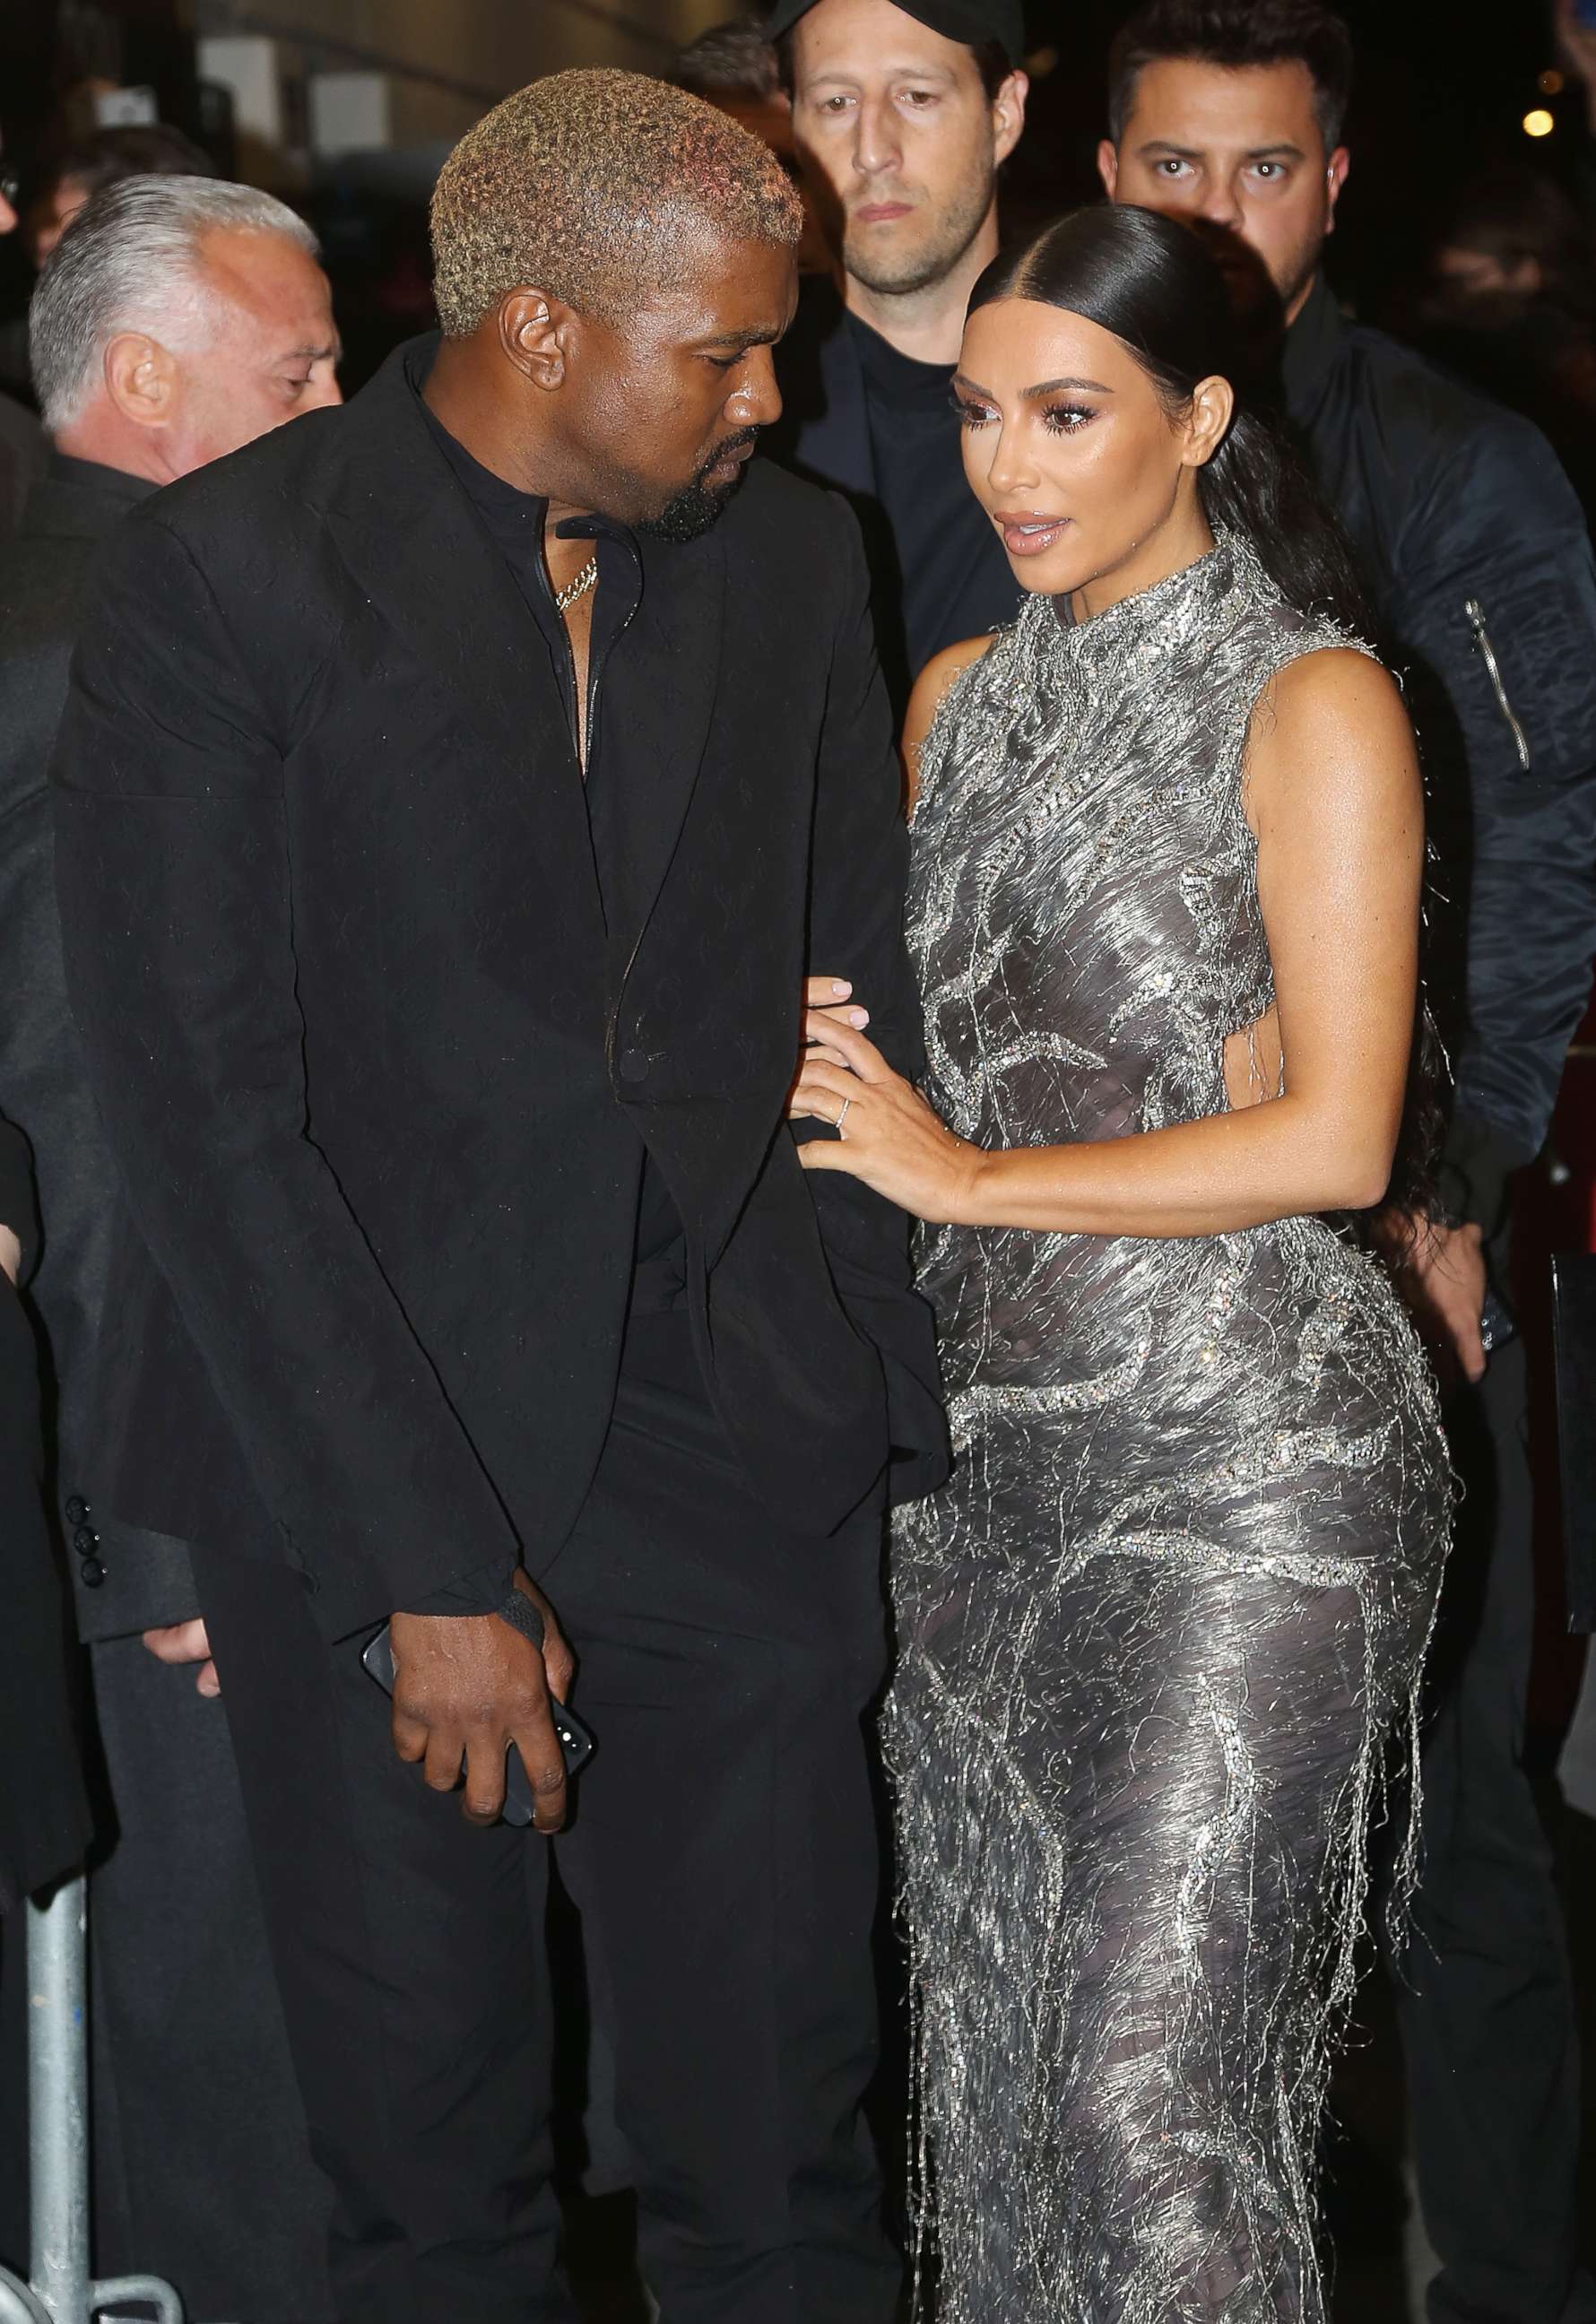 PHOTO: Kanye West and Kim Kardashian West attend the opening night of the new musical "The Cher Show" on Broadway at The Neil Simon Theatre, Dec. 3, 2018 in New York City.